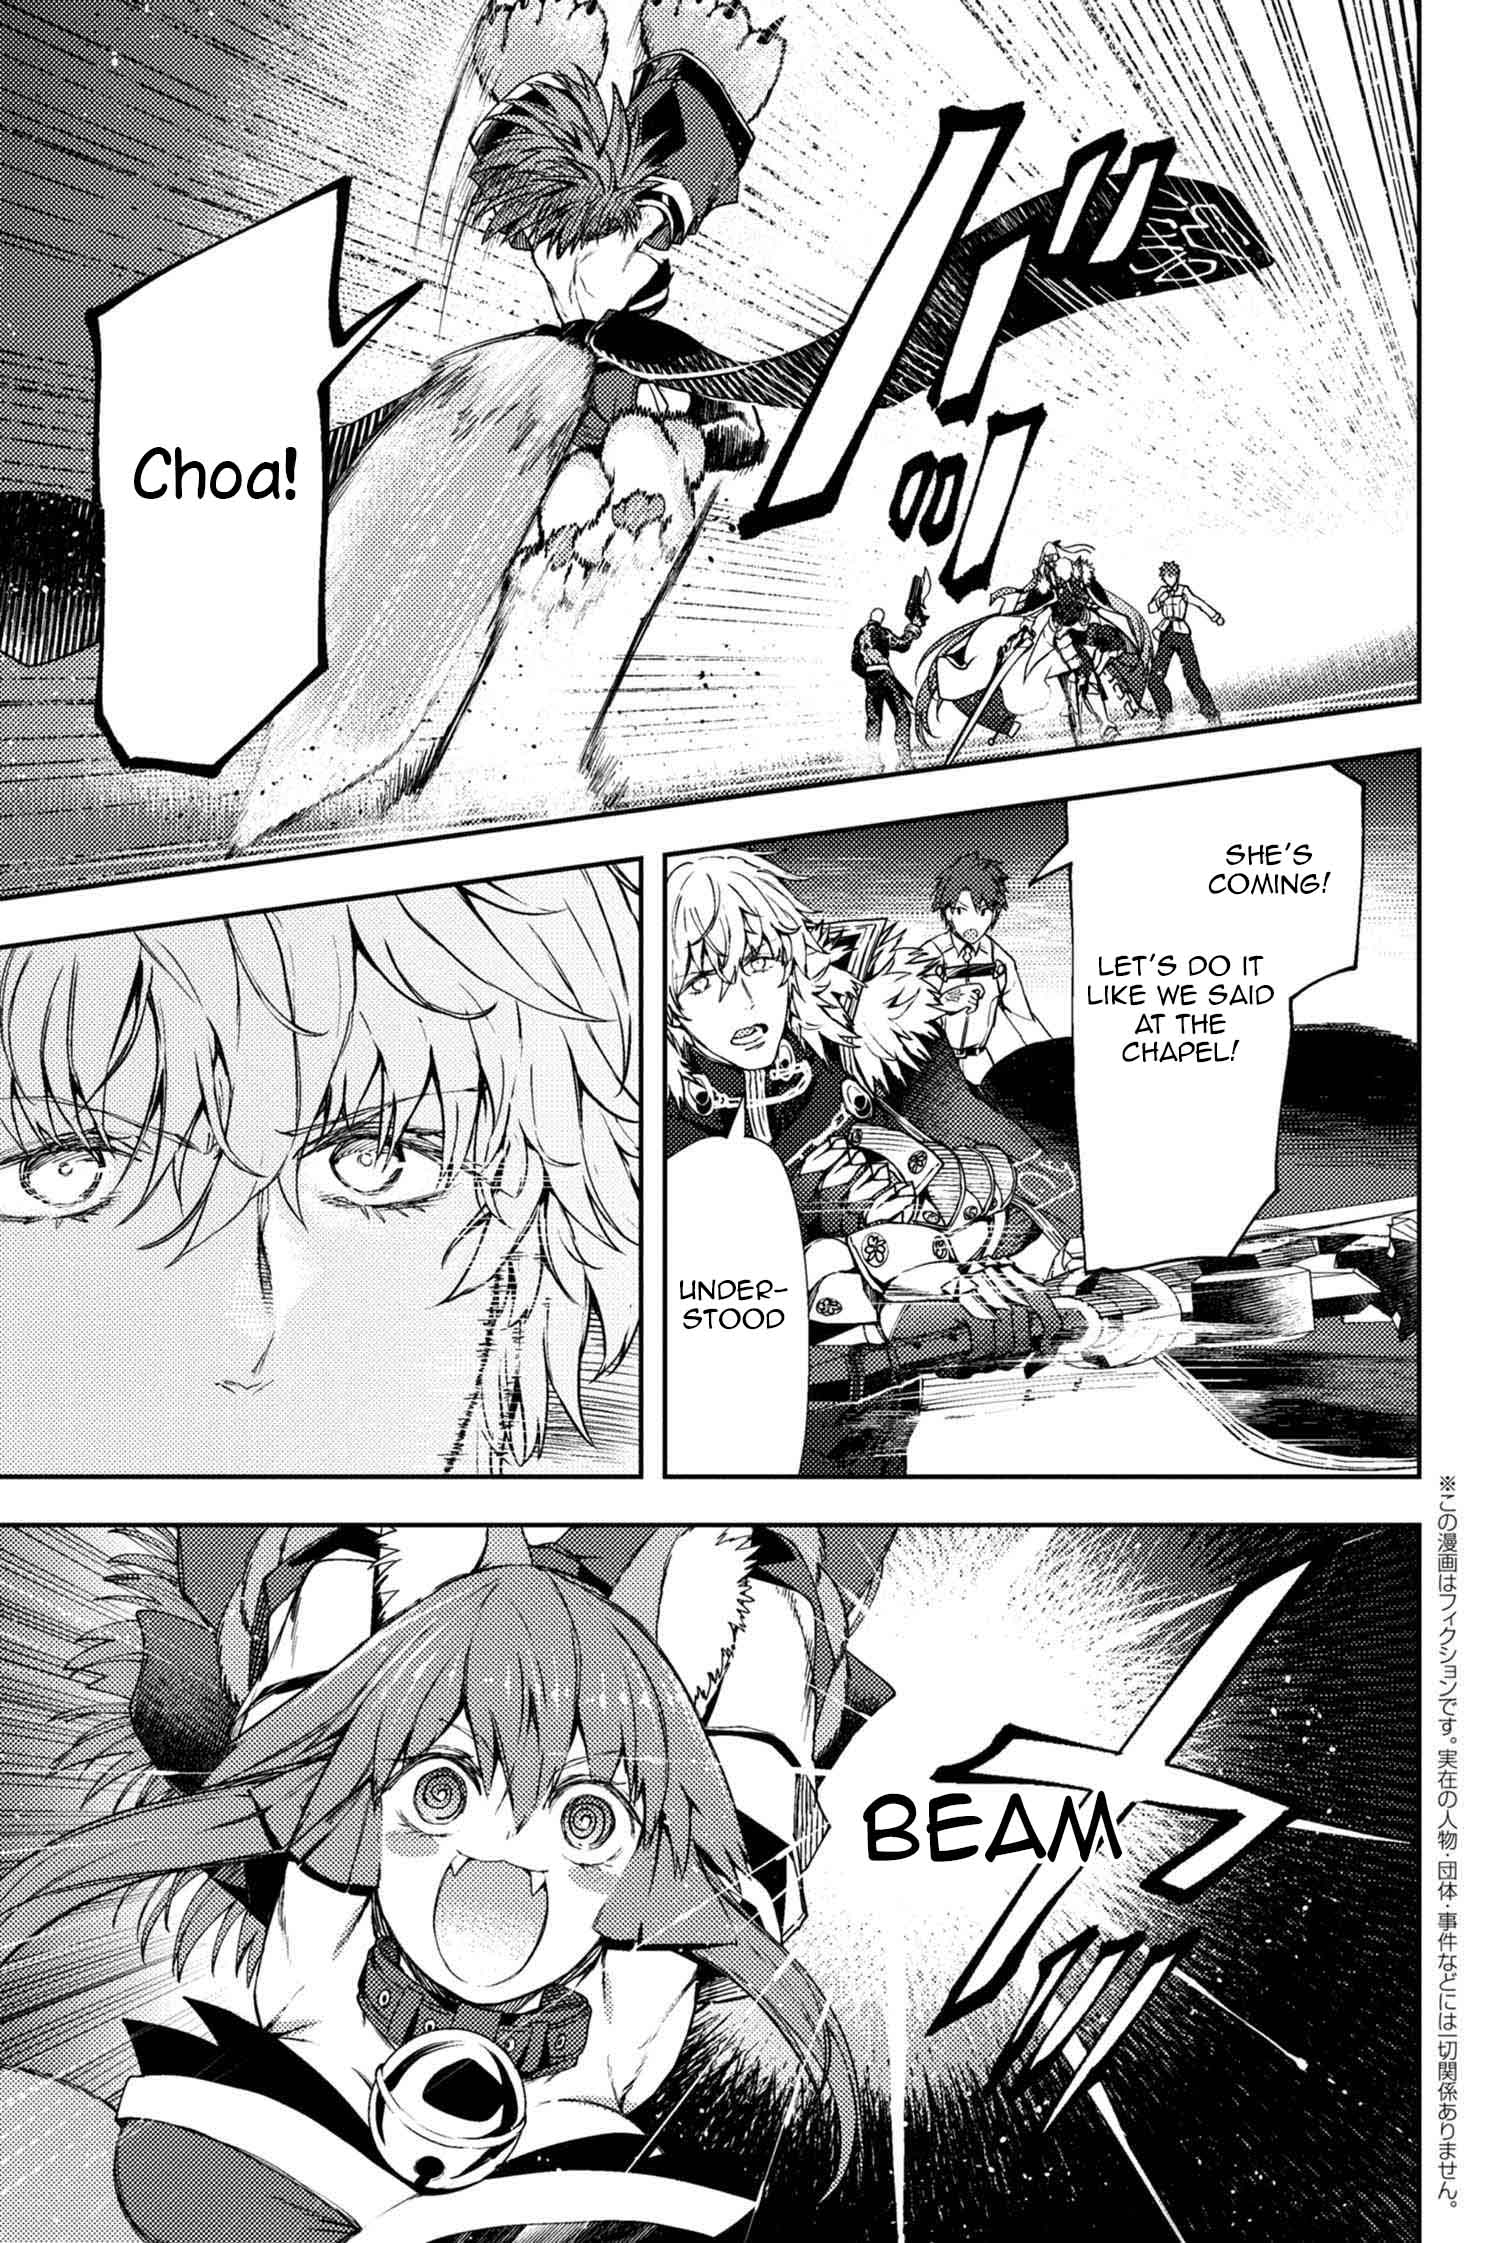 Fate/grand Order -Epic Of Remnant- Deep Sea Cyber-Paradise Se.ra.ph - 12.2 page 2